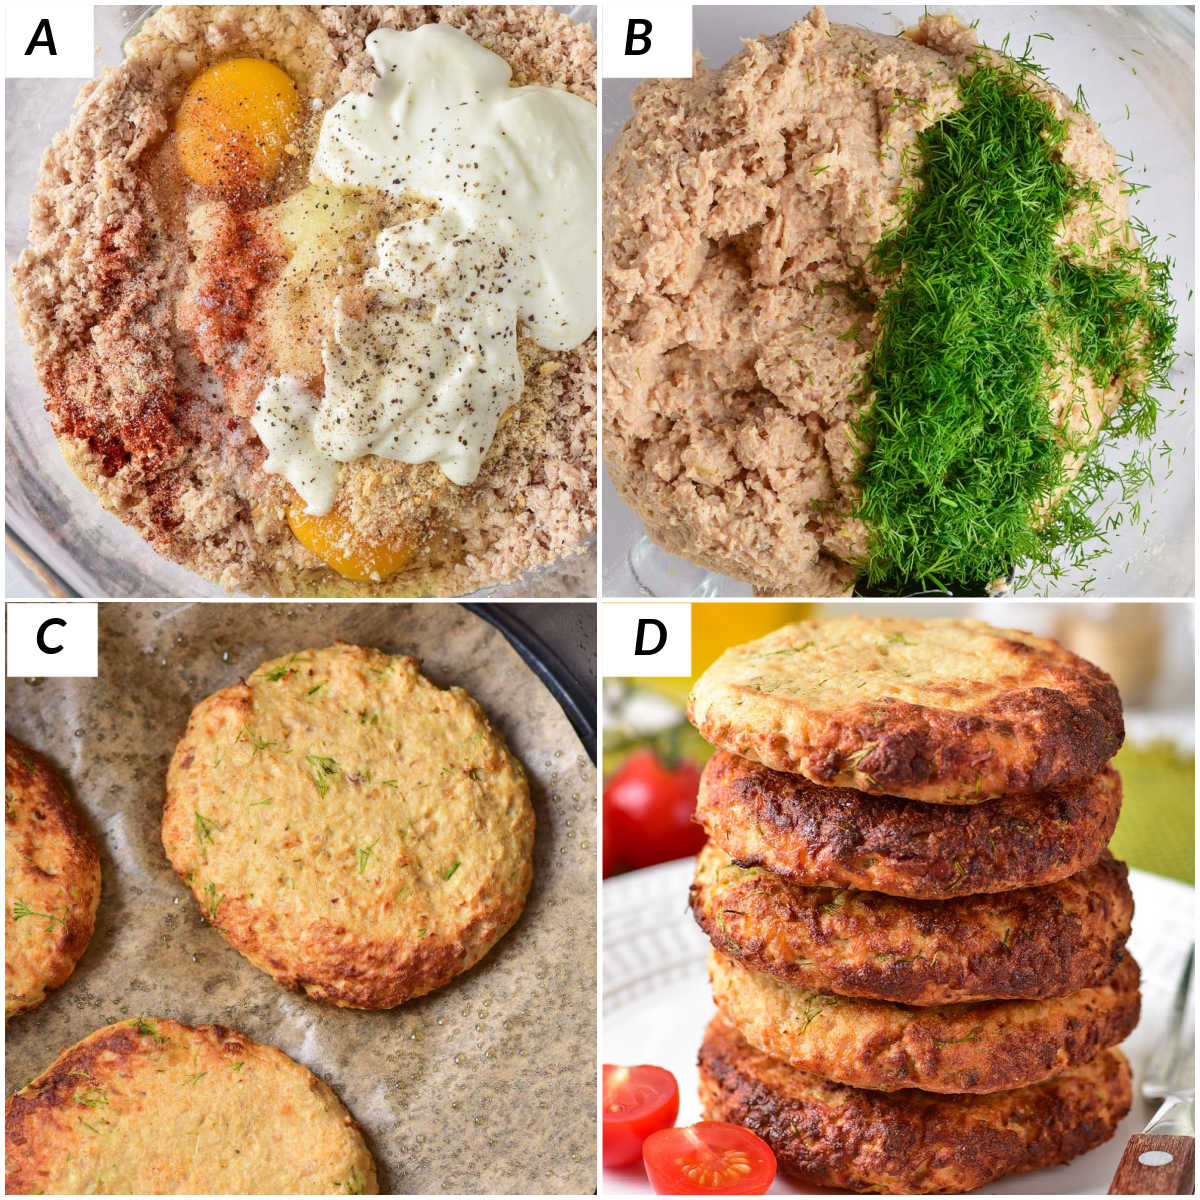 image collage showing the steps for making turkey patties